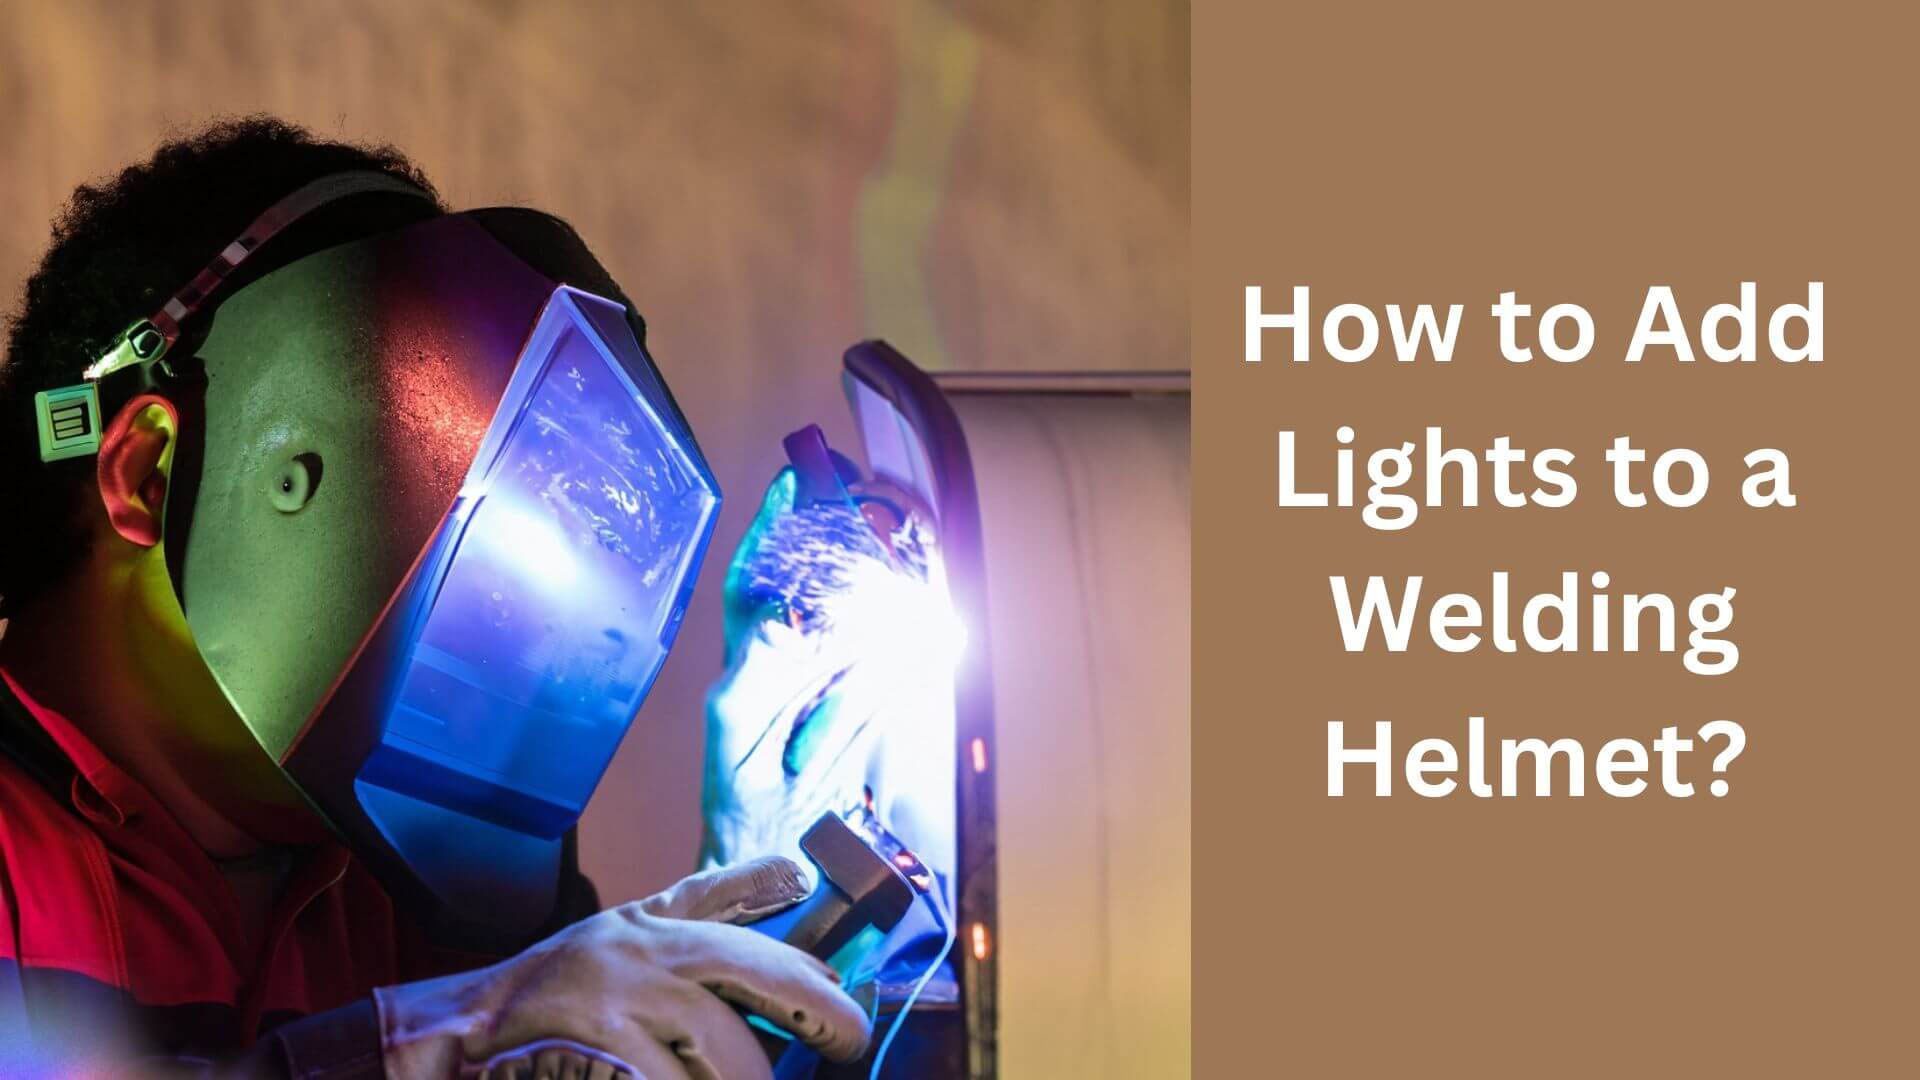 How to Add Lights to a Welding Helmet? A DIY Guide to Adding Lights